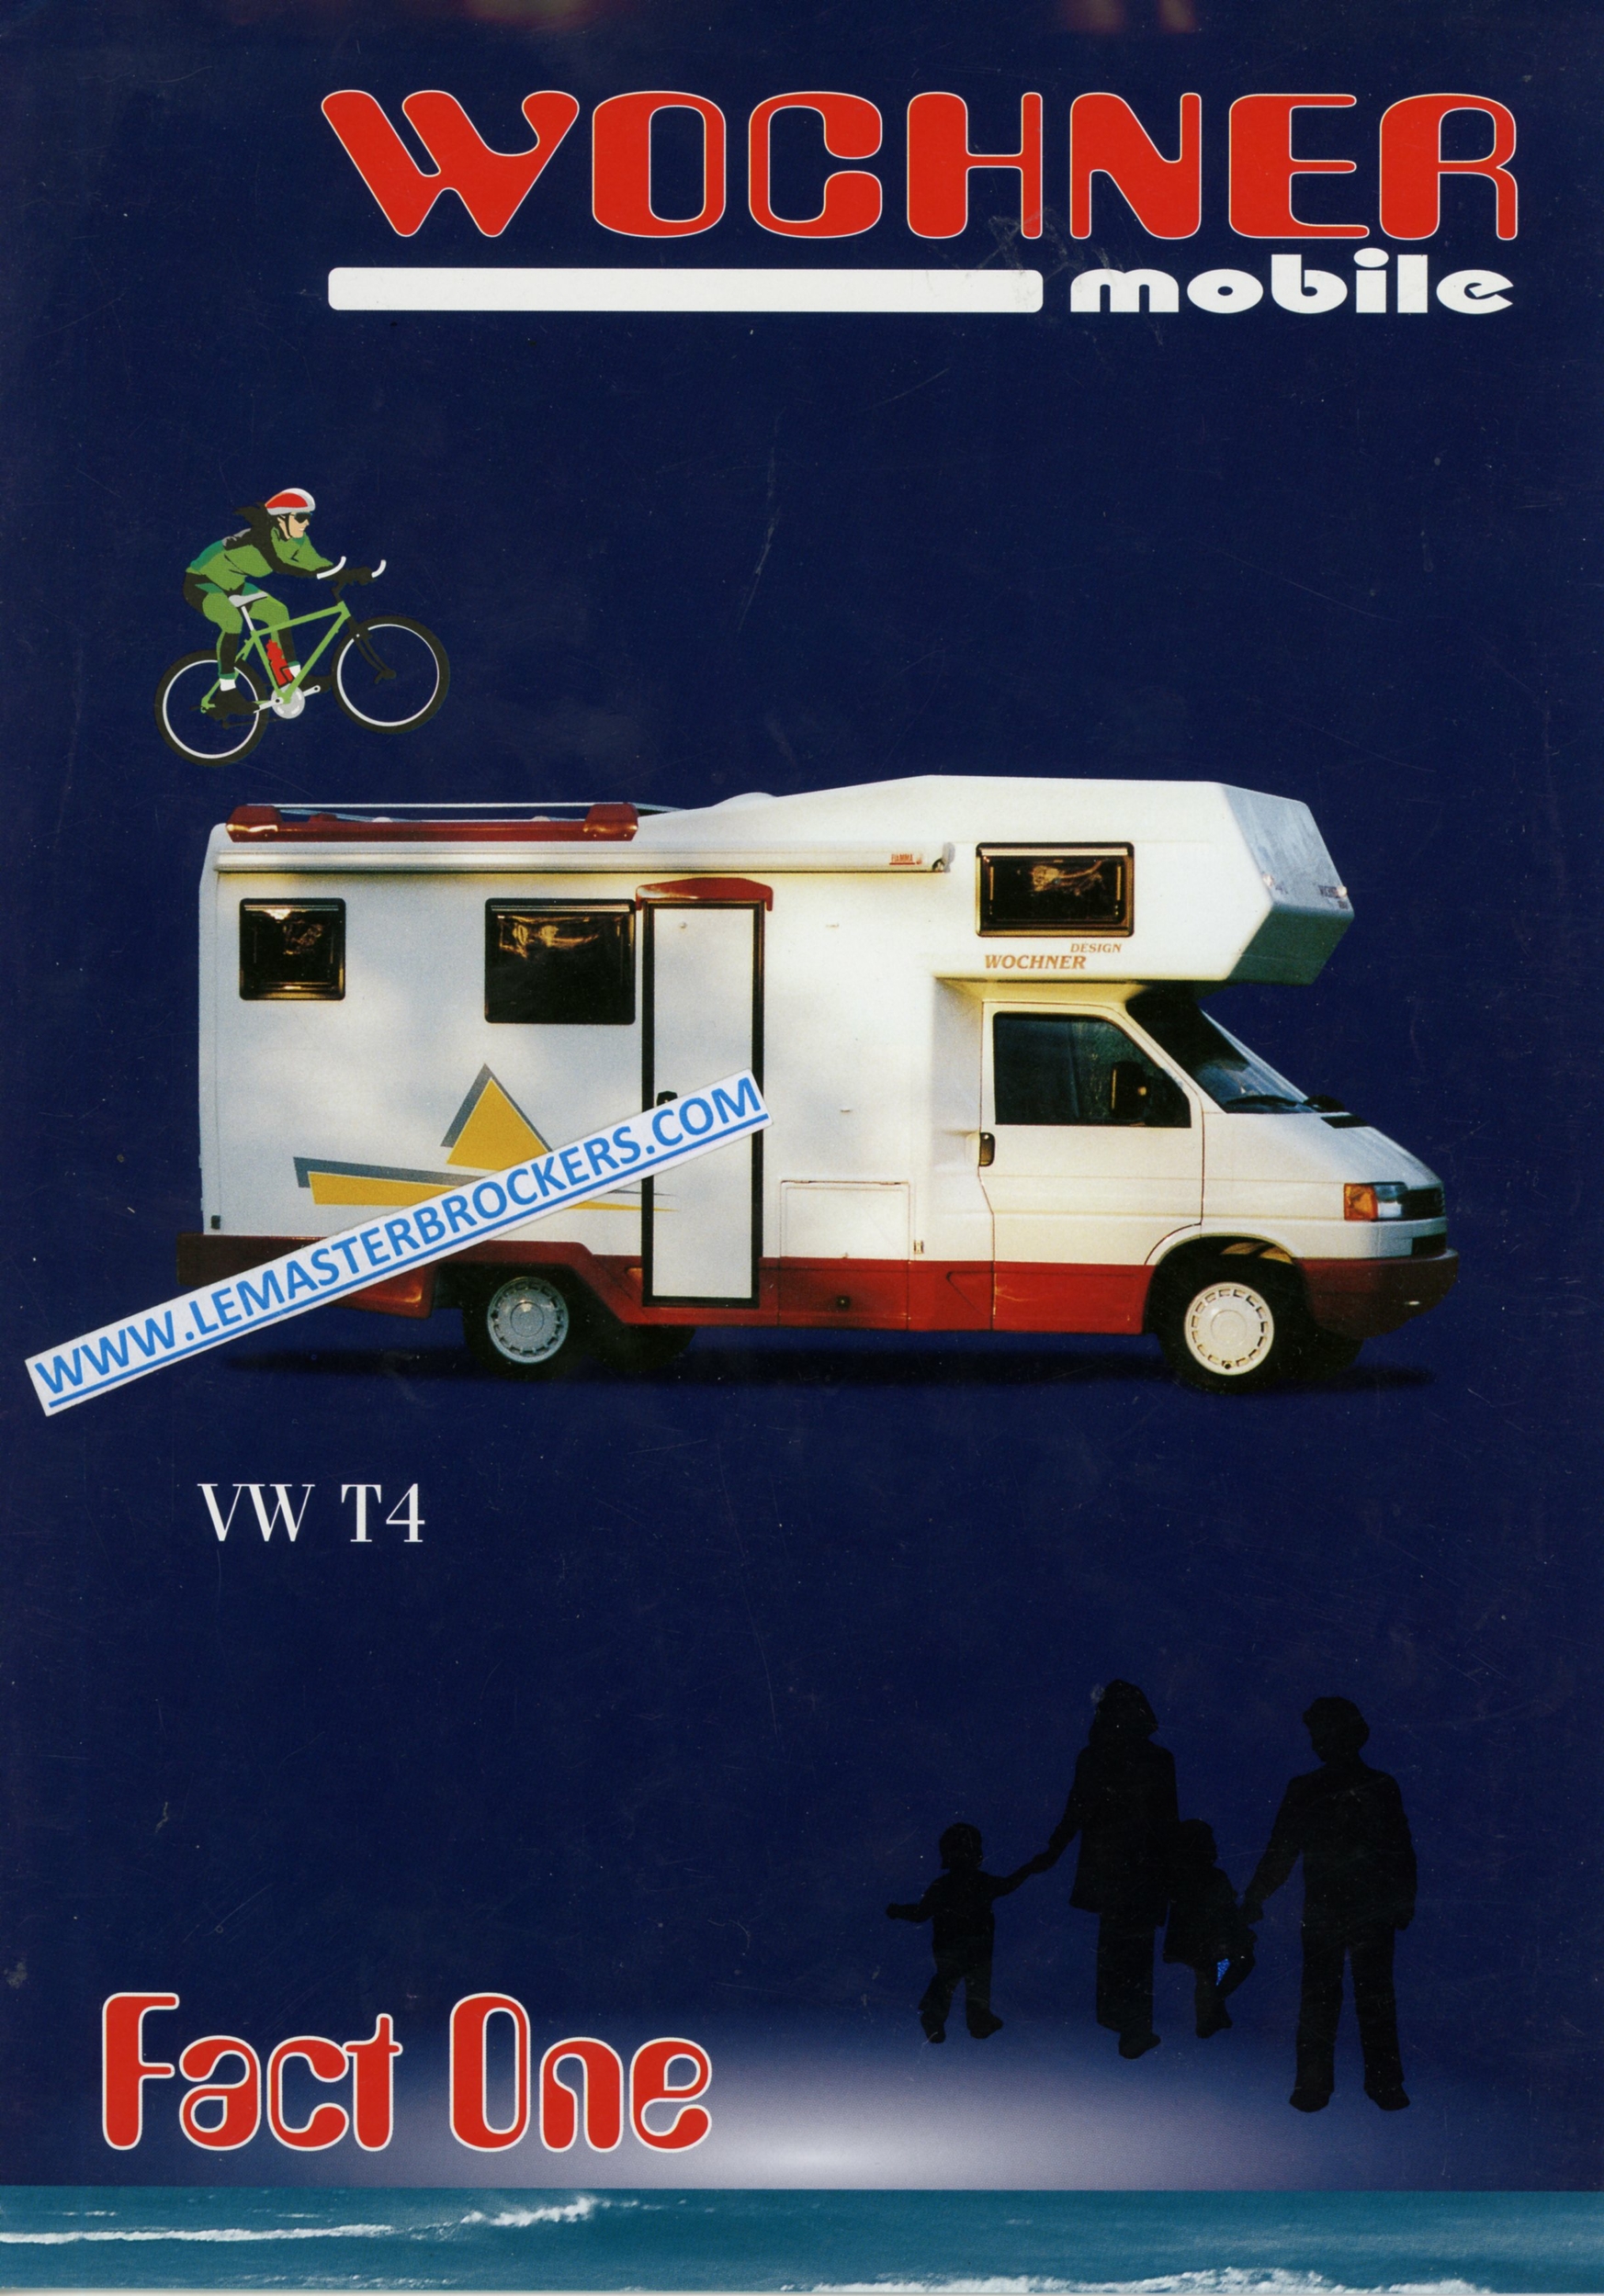 vw-t4-wochner-mobile-fact-one-volkswagen-brochure-camping-car-LEMASTERBROCKERS